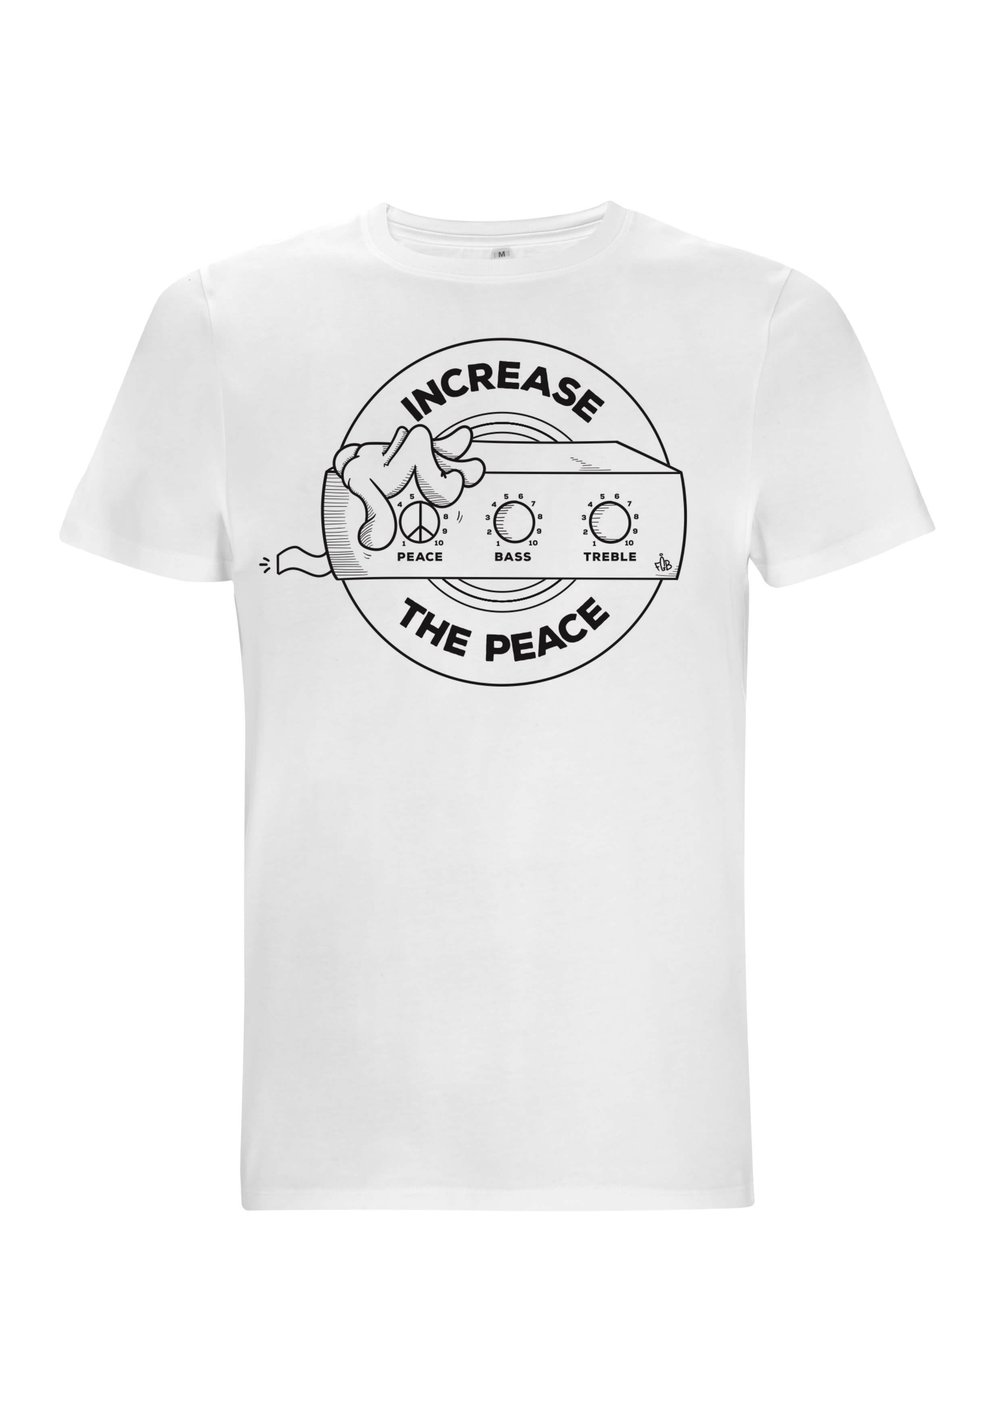 LIMITED EDITION - INCREASE THE PEACE TEE